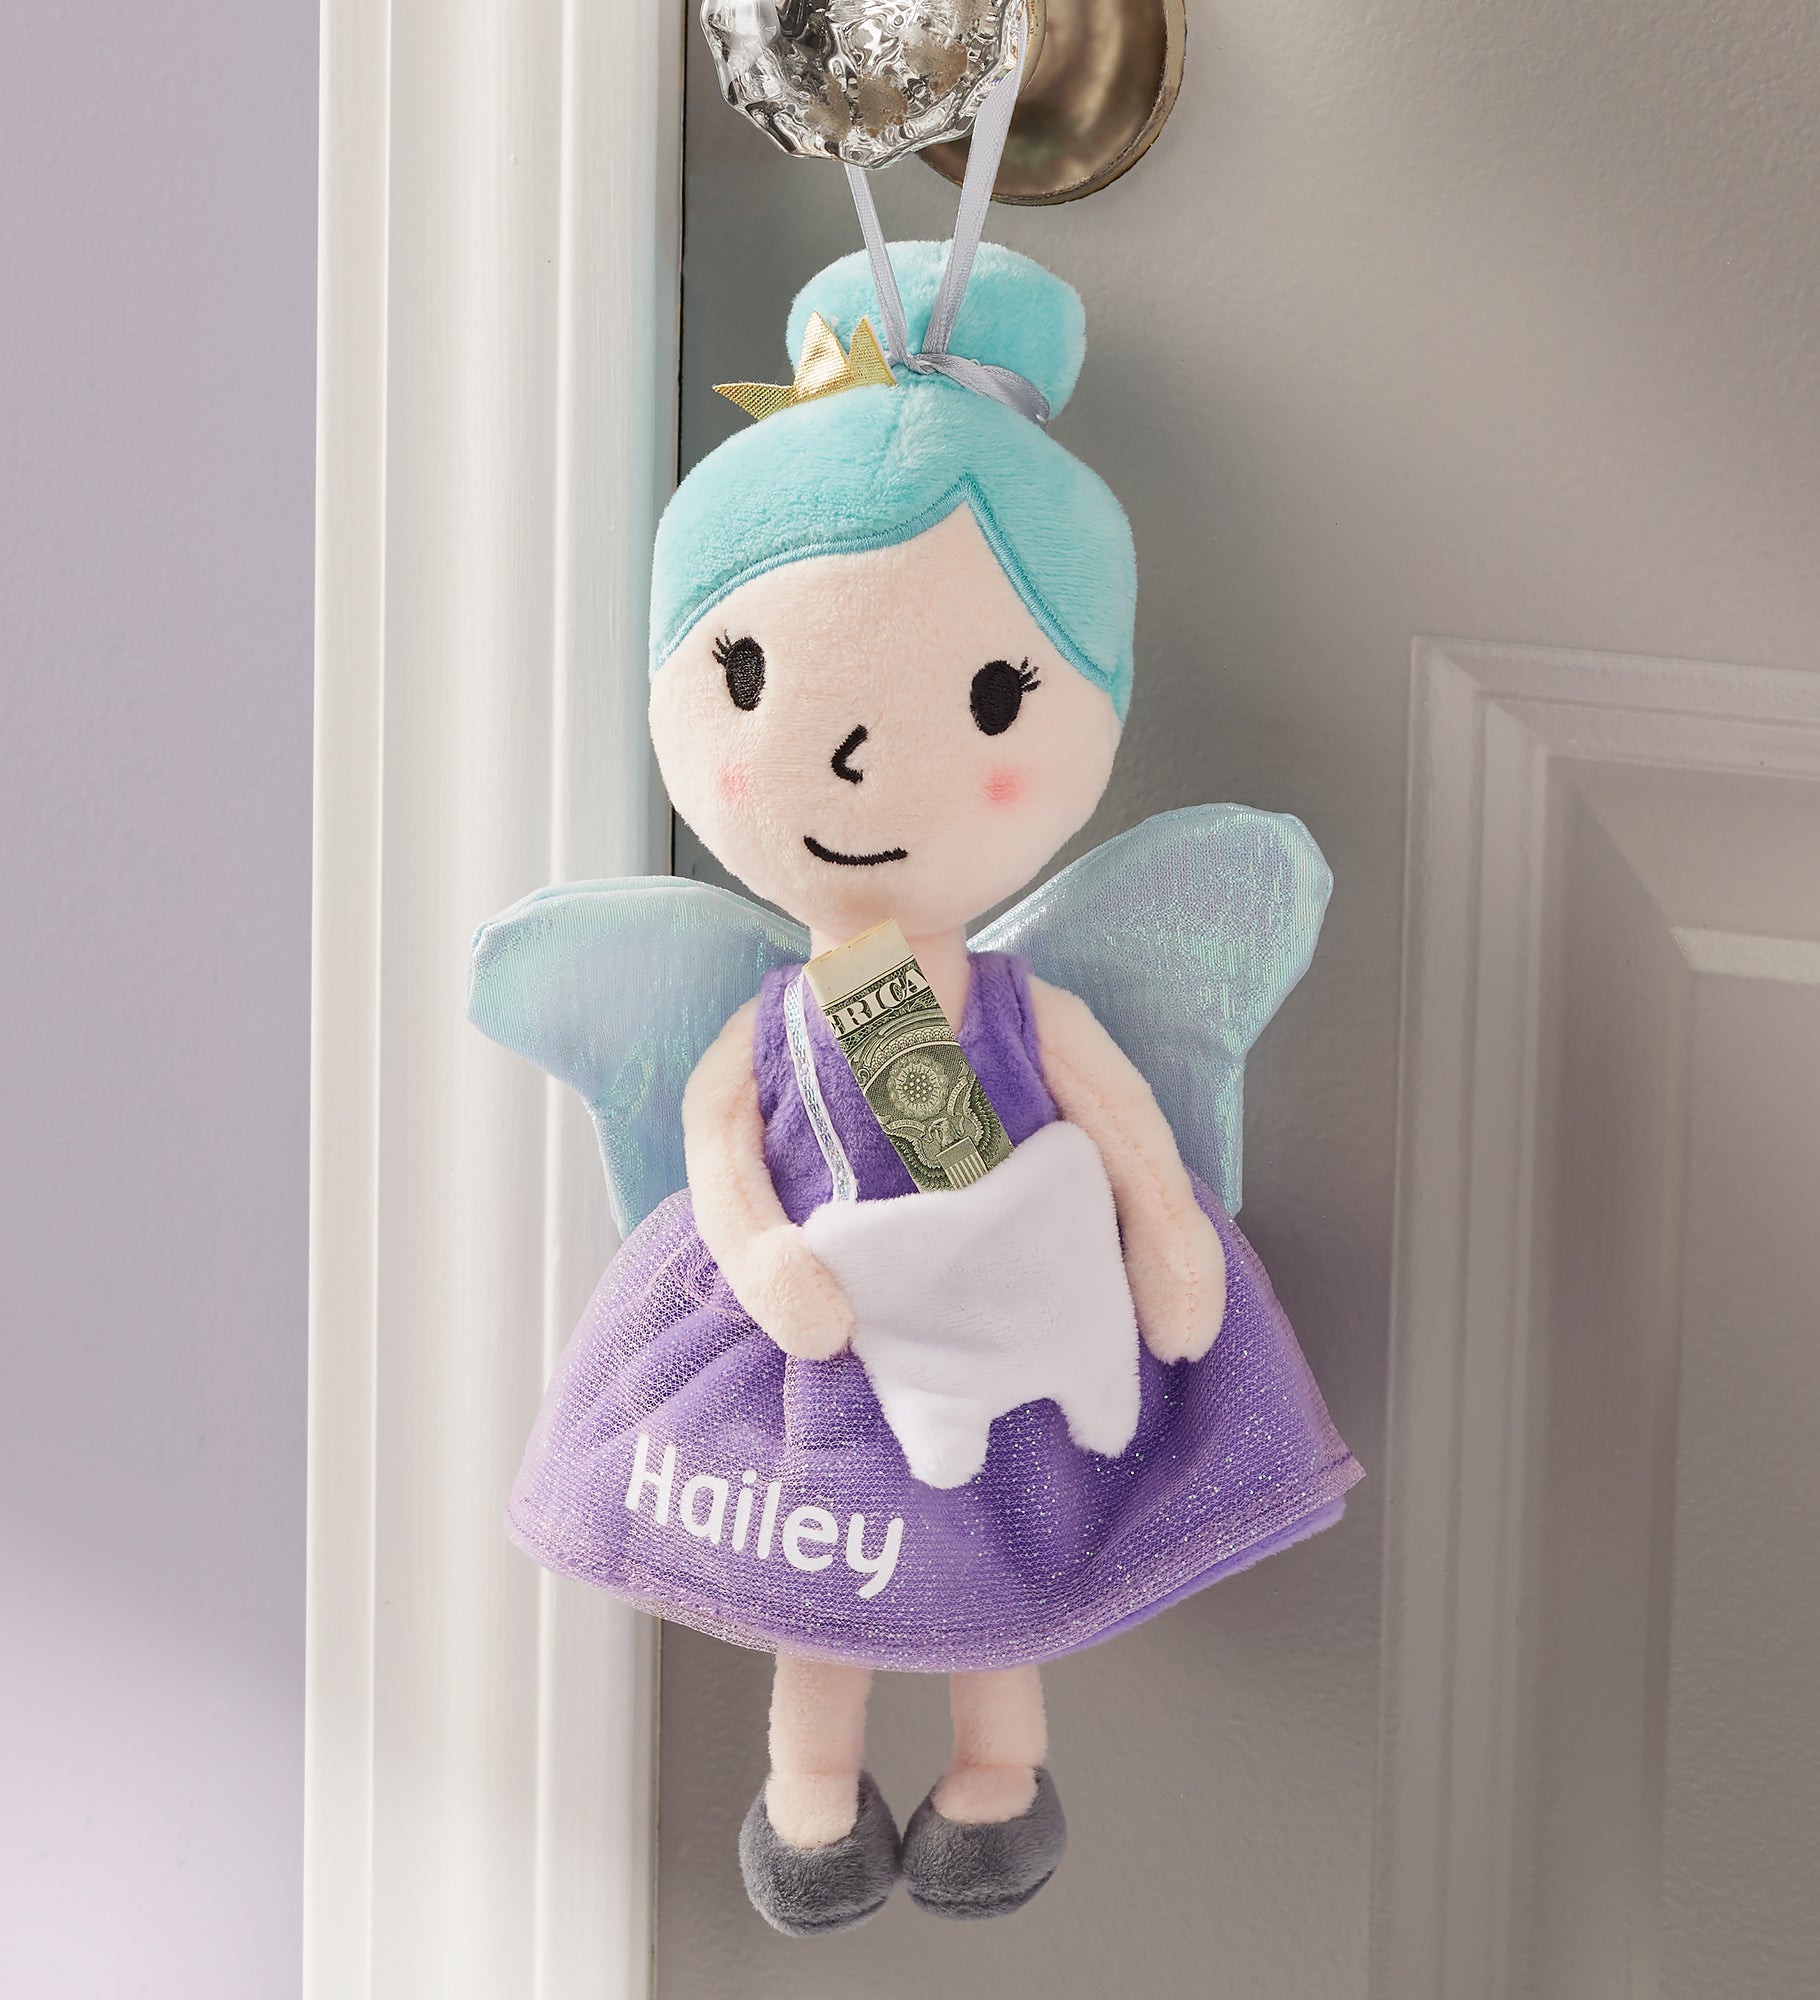 Sweet Dreams Personalized Tooth Fairy Pillow